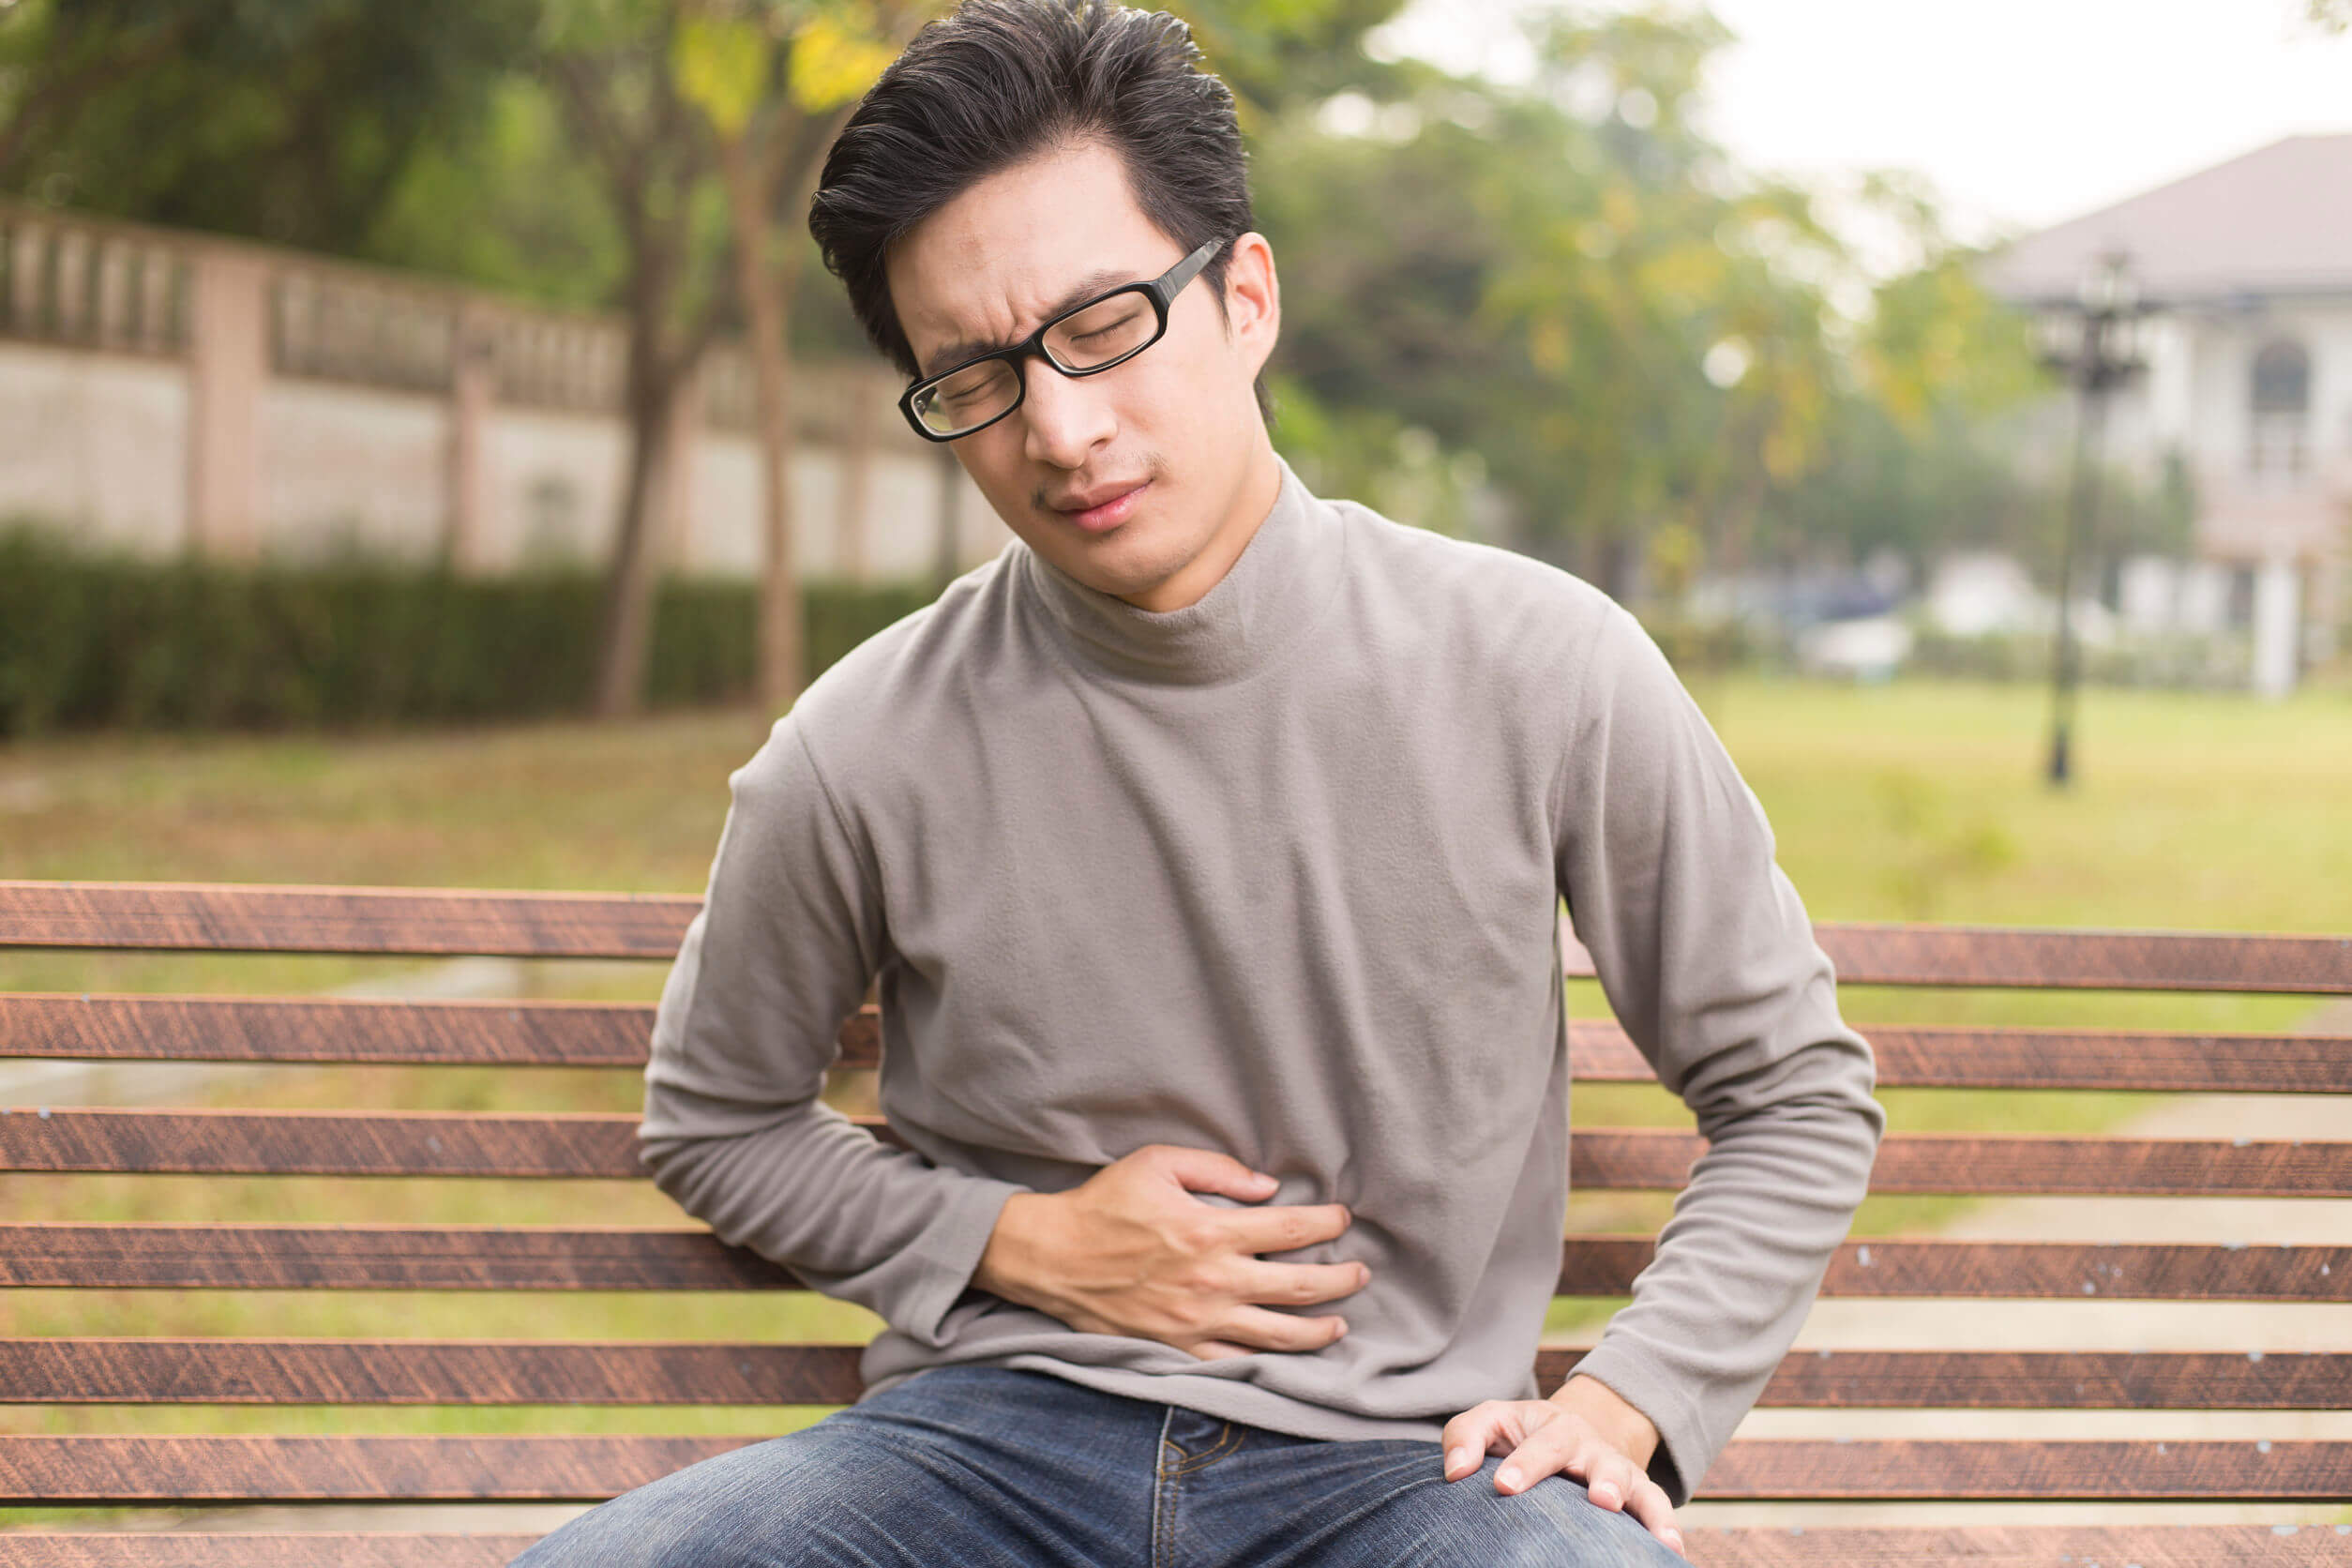 Venlafaxine causes gastrointestinal upset relatively frequently.